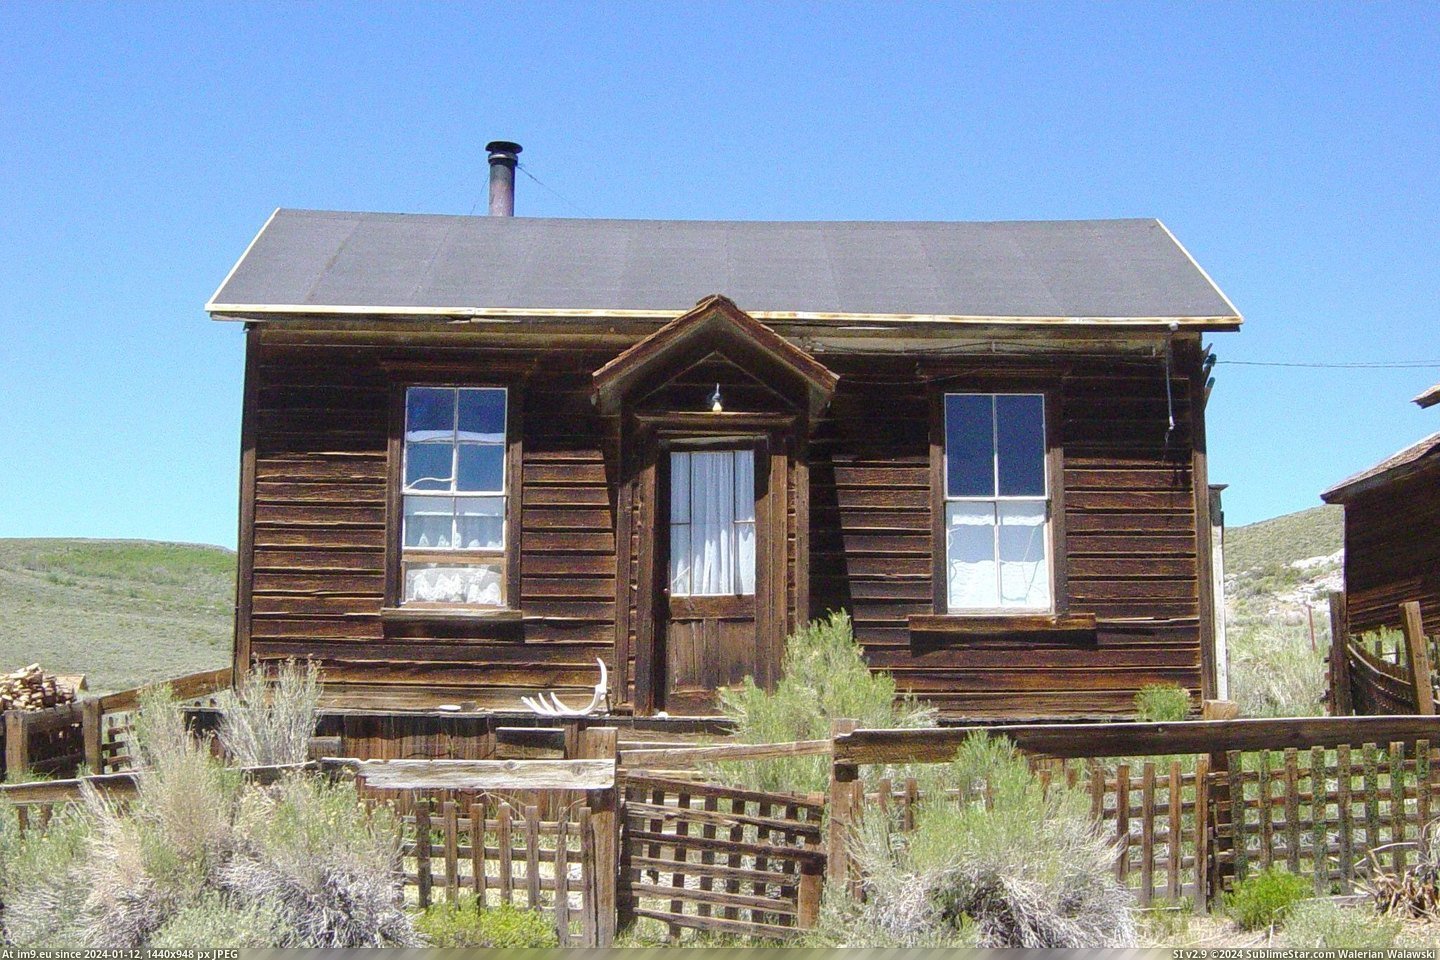 #California #Bodie #Donnelly #House Donnelly House In Bodie, California Pic. (Изображение из альбом Bodie - a ghost town in Eastern California))